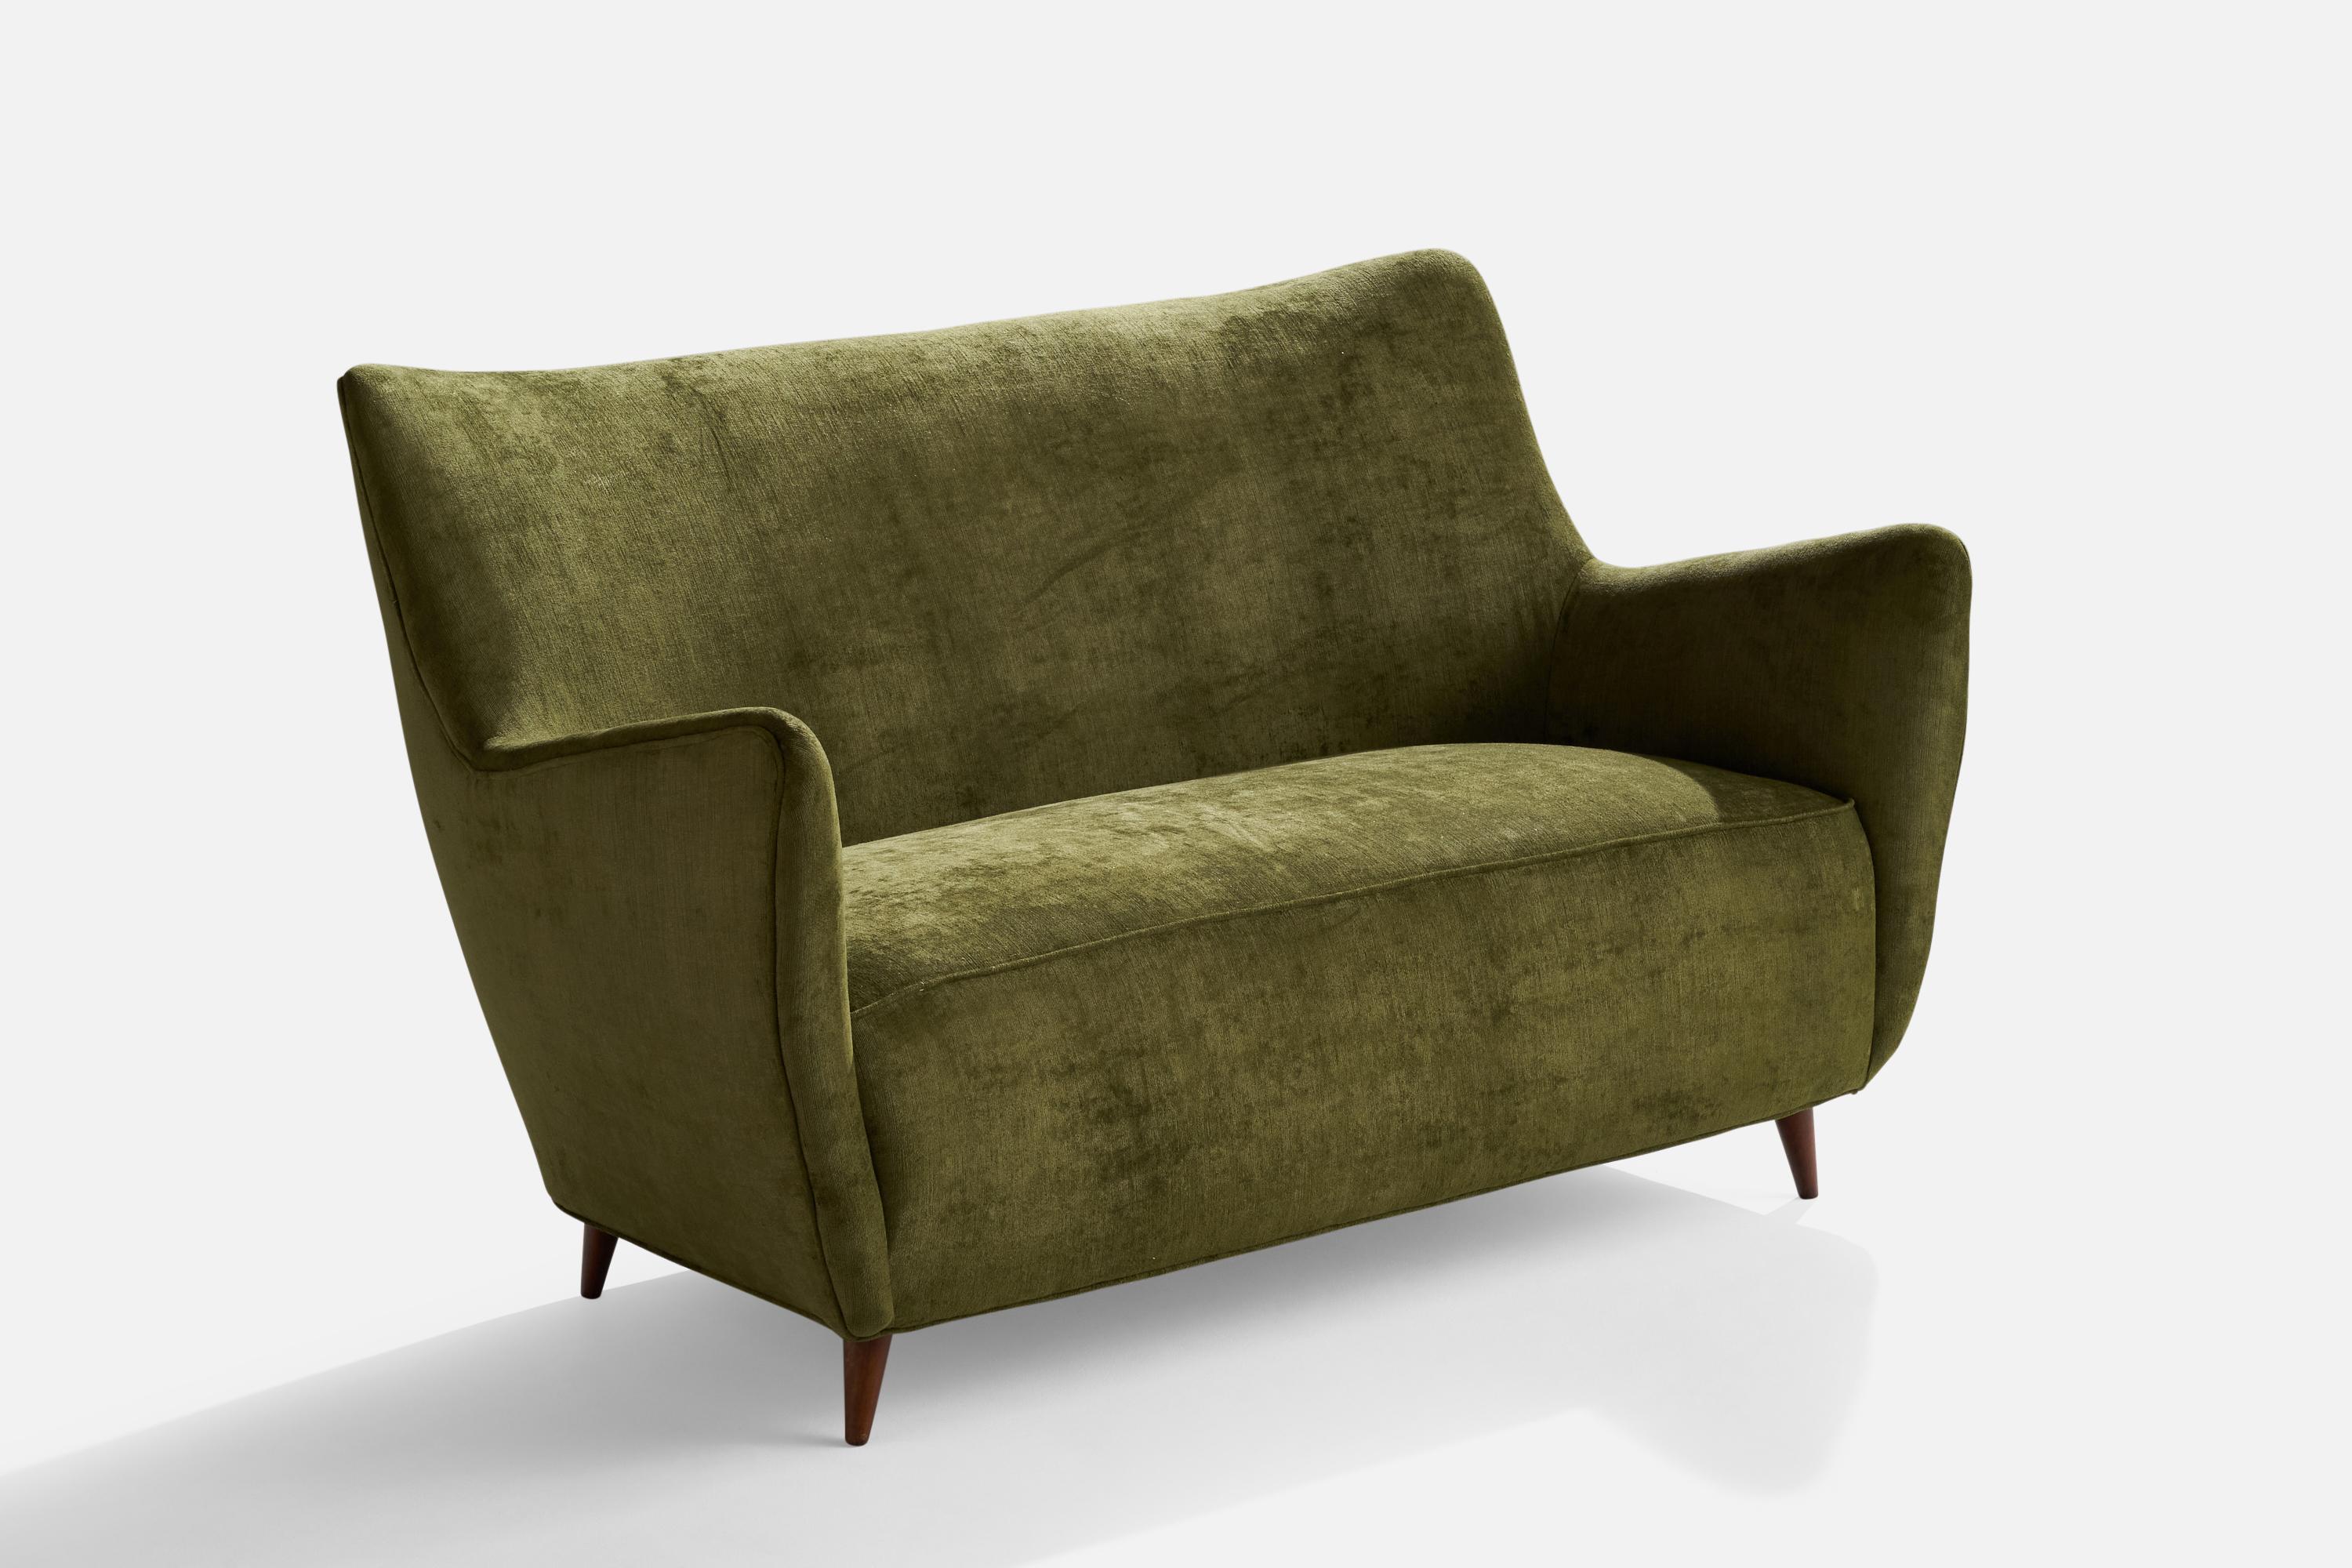 A green velvet and wood sofa or settee designed by Guglielmo Veronesi and produced by I.S.A Bergamo, Italy, 1950s.

Seat height 17.5”
